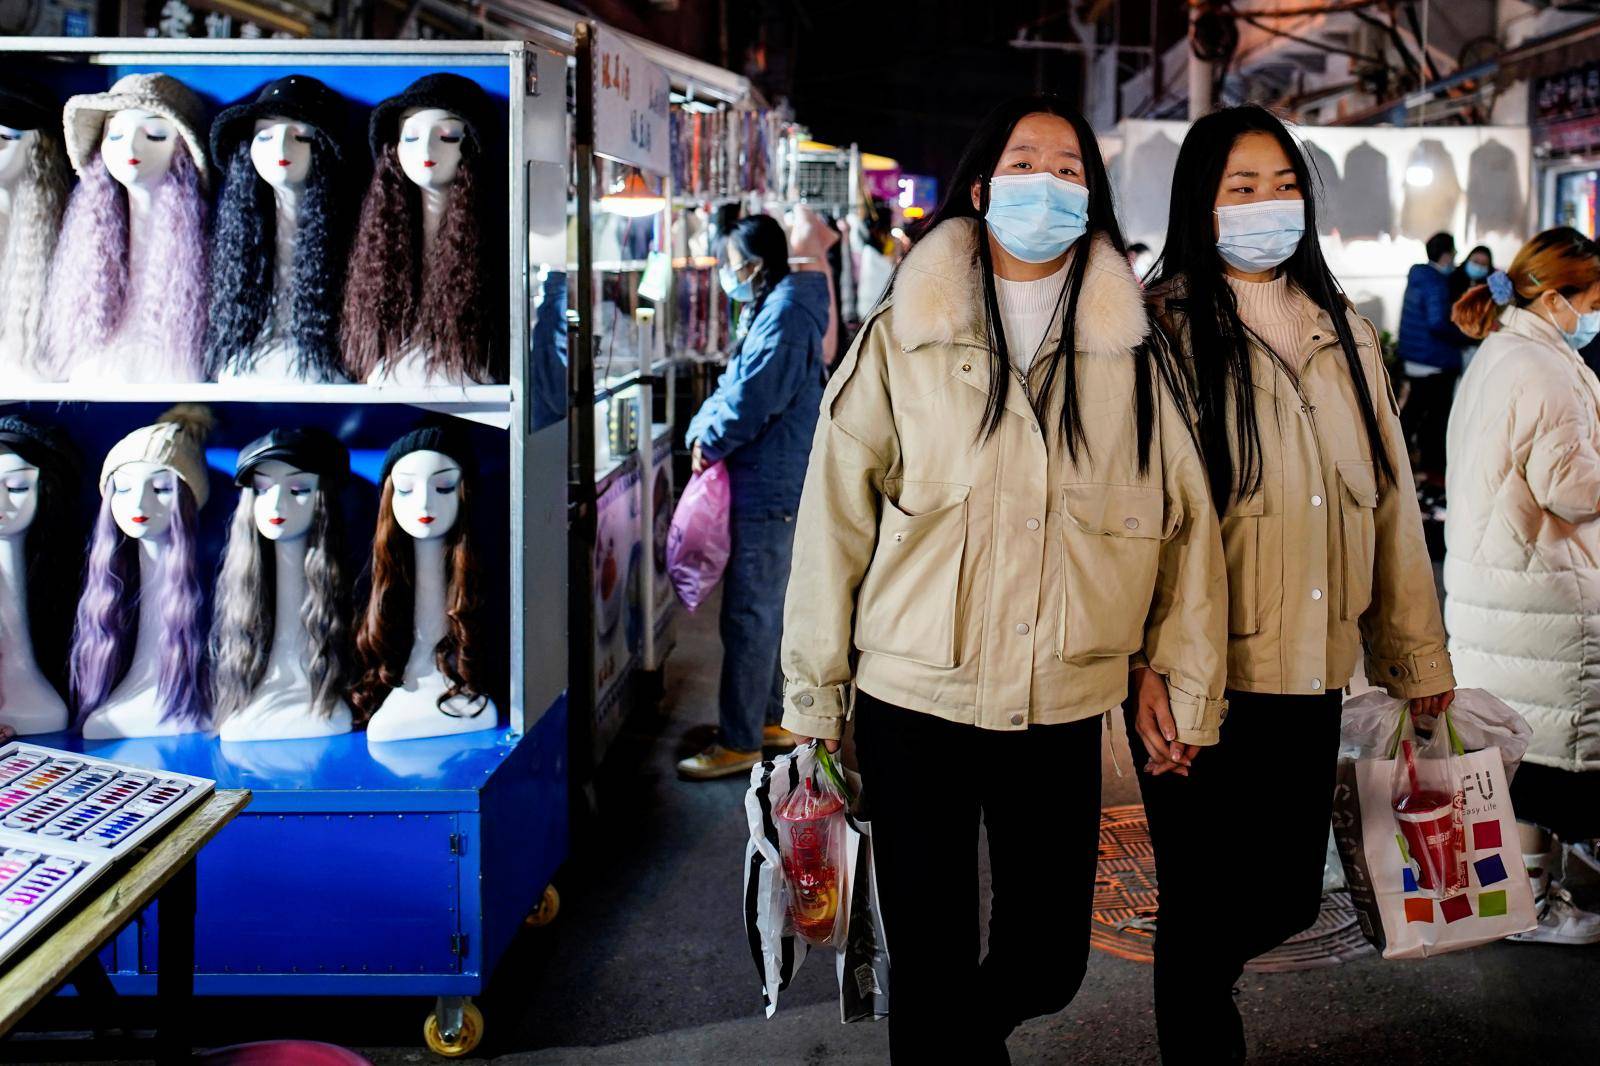 People wearing face masks visit a street market almost a year after the global outbreak of the coronavirus disease (COVID-19) in Wuhan